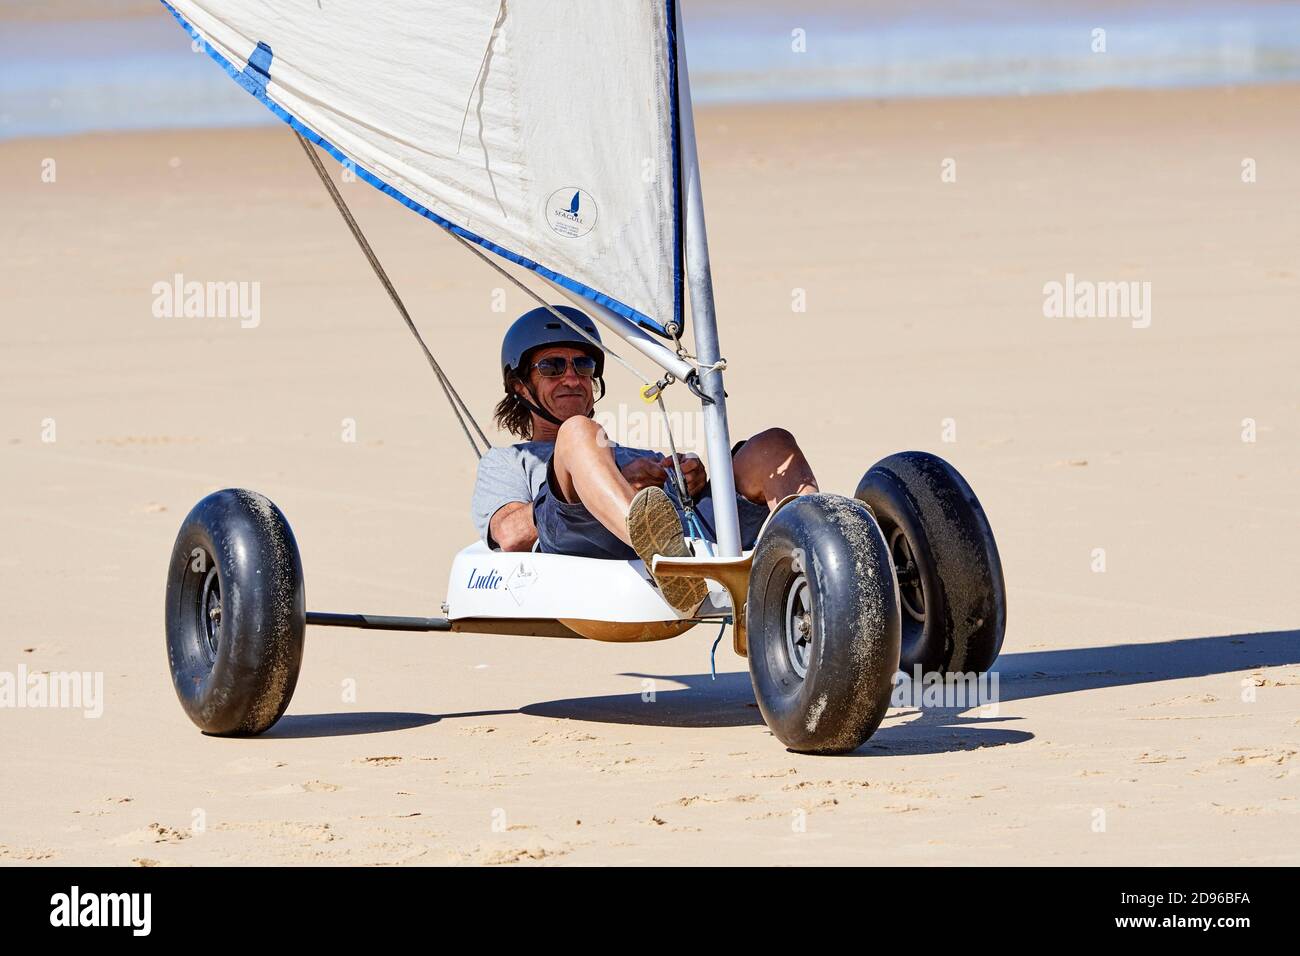 Land sailing / sand yachting / land yachting on the beach at Mimizan, Aquitaine, France. Stock Photo